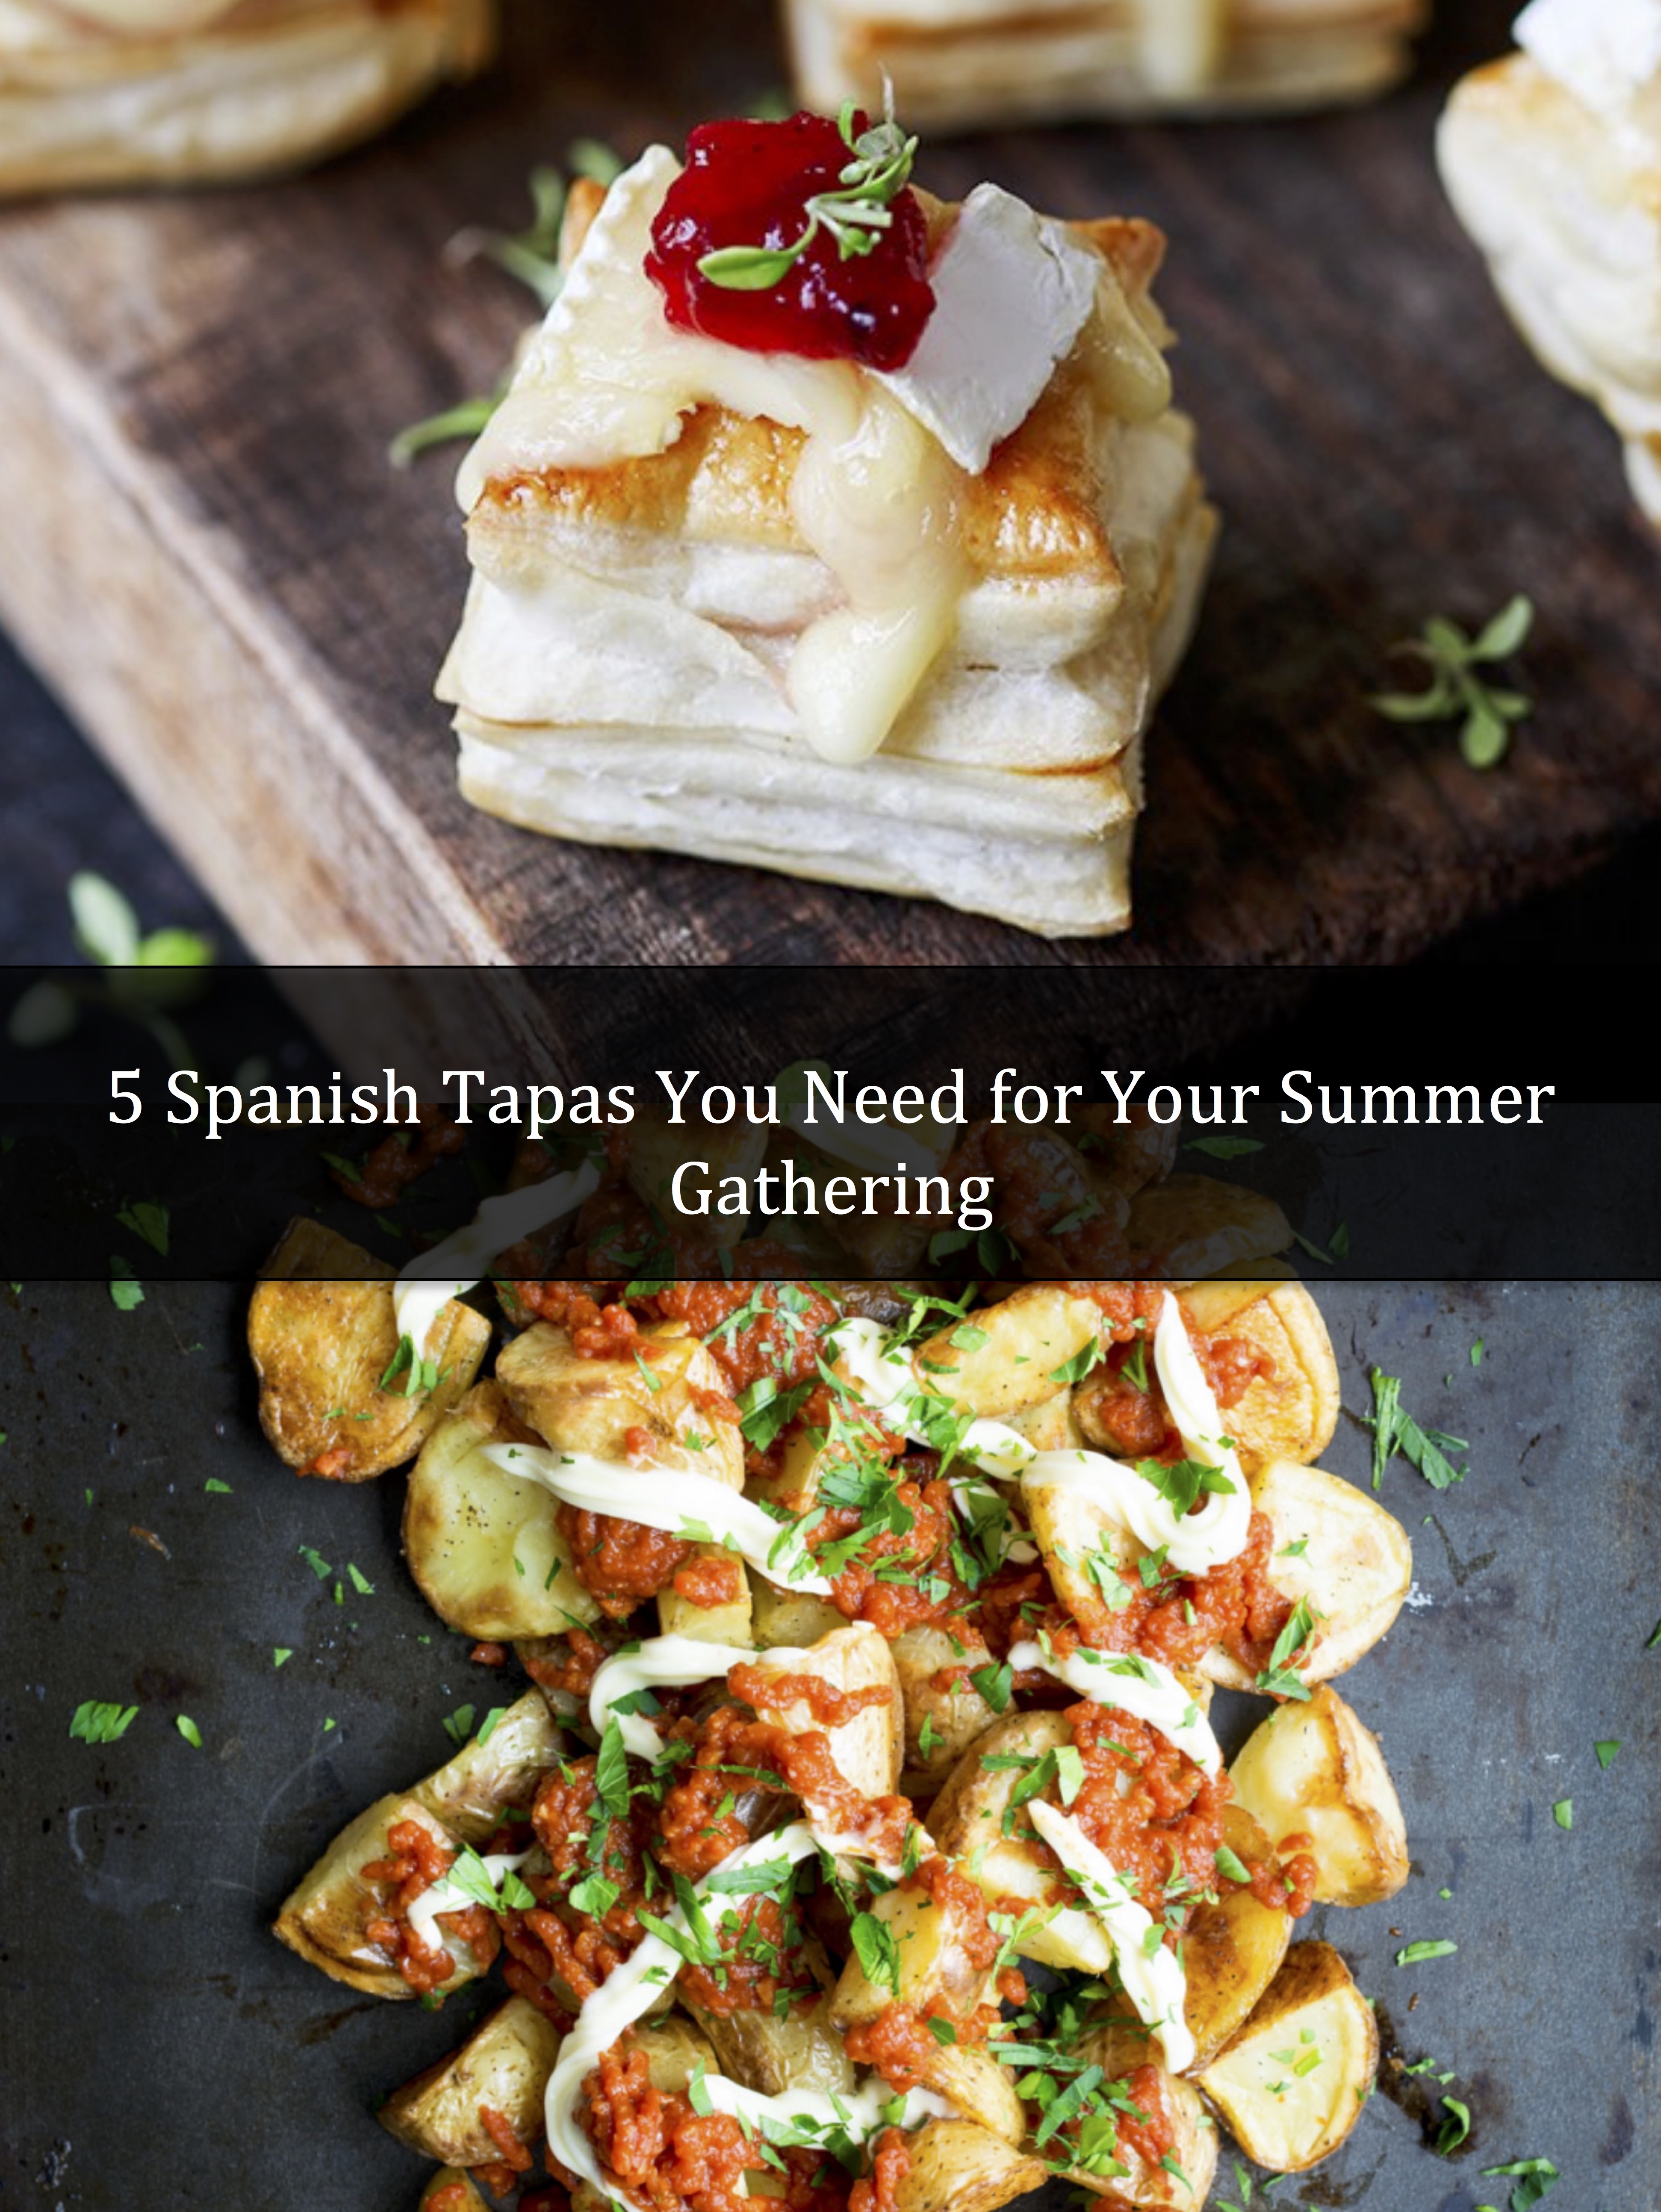 5 Spanish Tapas You Need for Your Summer Gathering